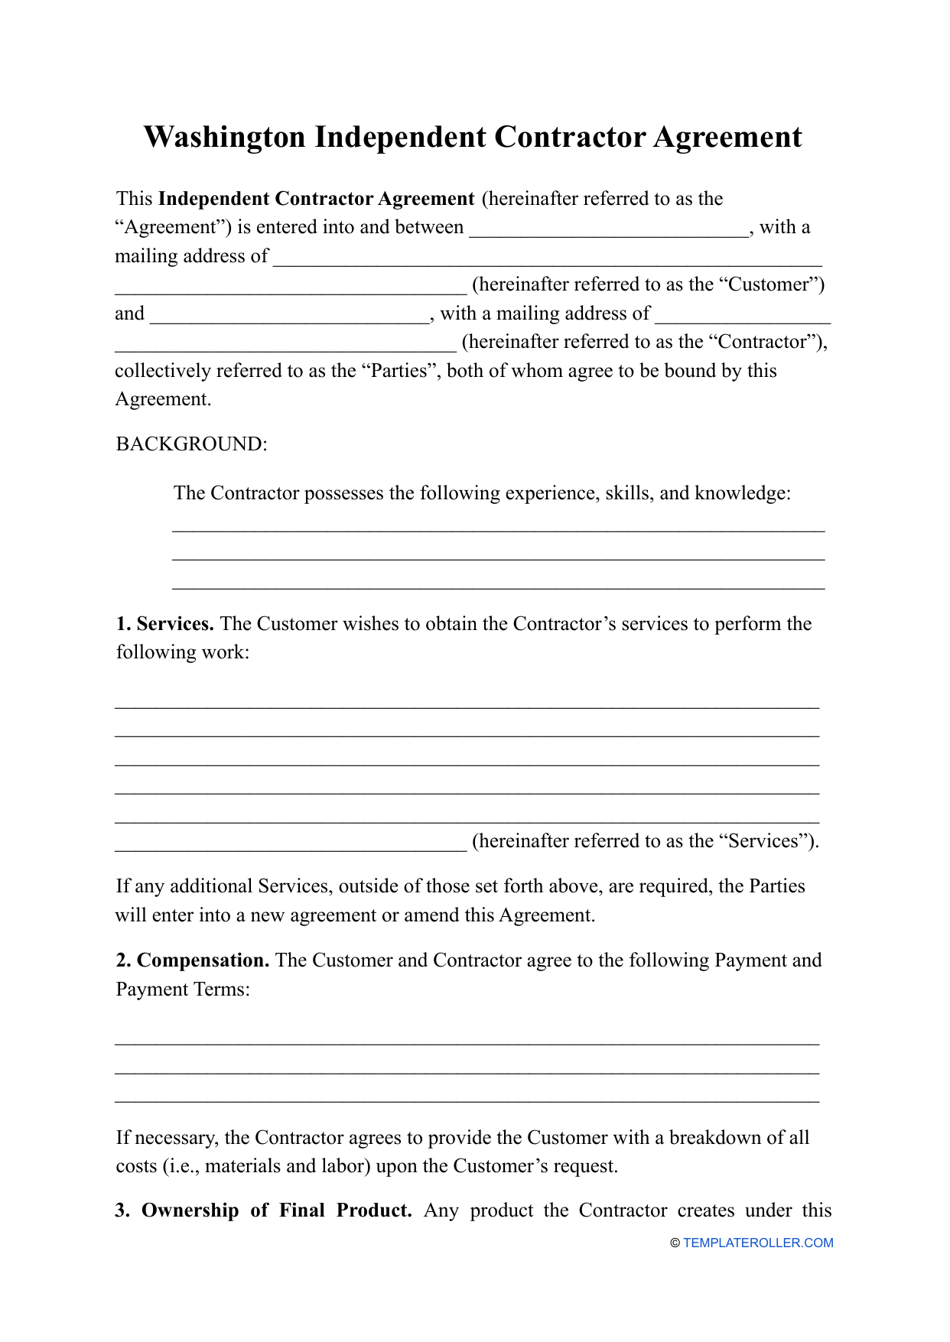 Independent Contractor Agreement Template - Washington, Page 1